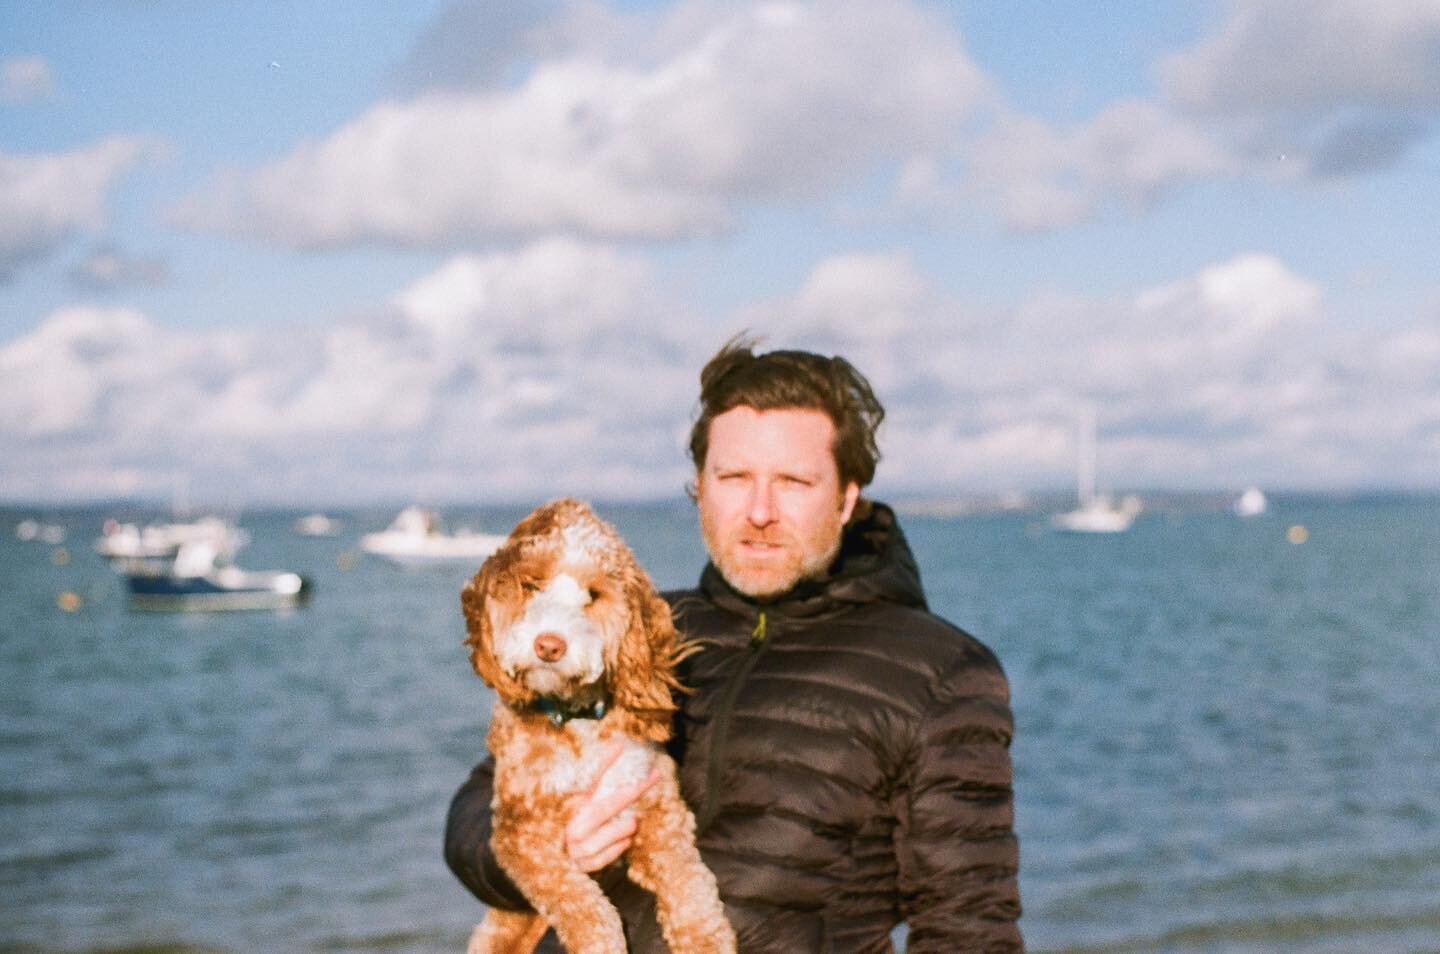 Me and my mate. Doing our out of focus thing but still rocking it. 📷 @juliadavis101 
.
.
.
.
.
#35mm #shotonfilm #filmisnotdead #shootmorefilm #welltraveled #kernow #exploremore #swisbest #cornwall #freshairclub #outdoorcameraclub #wildernessculture